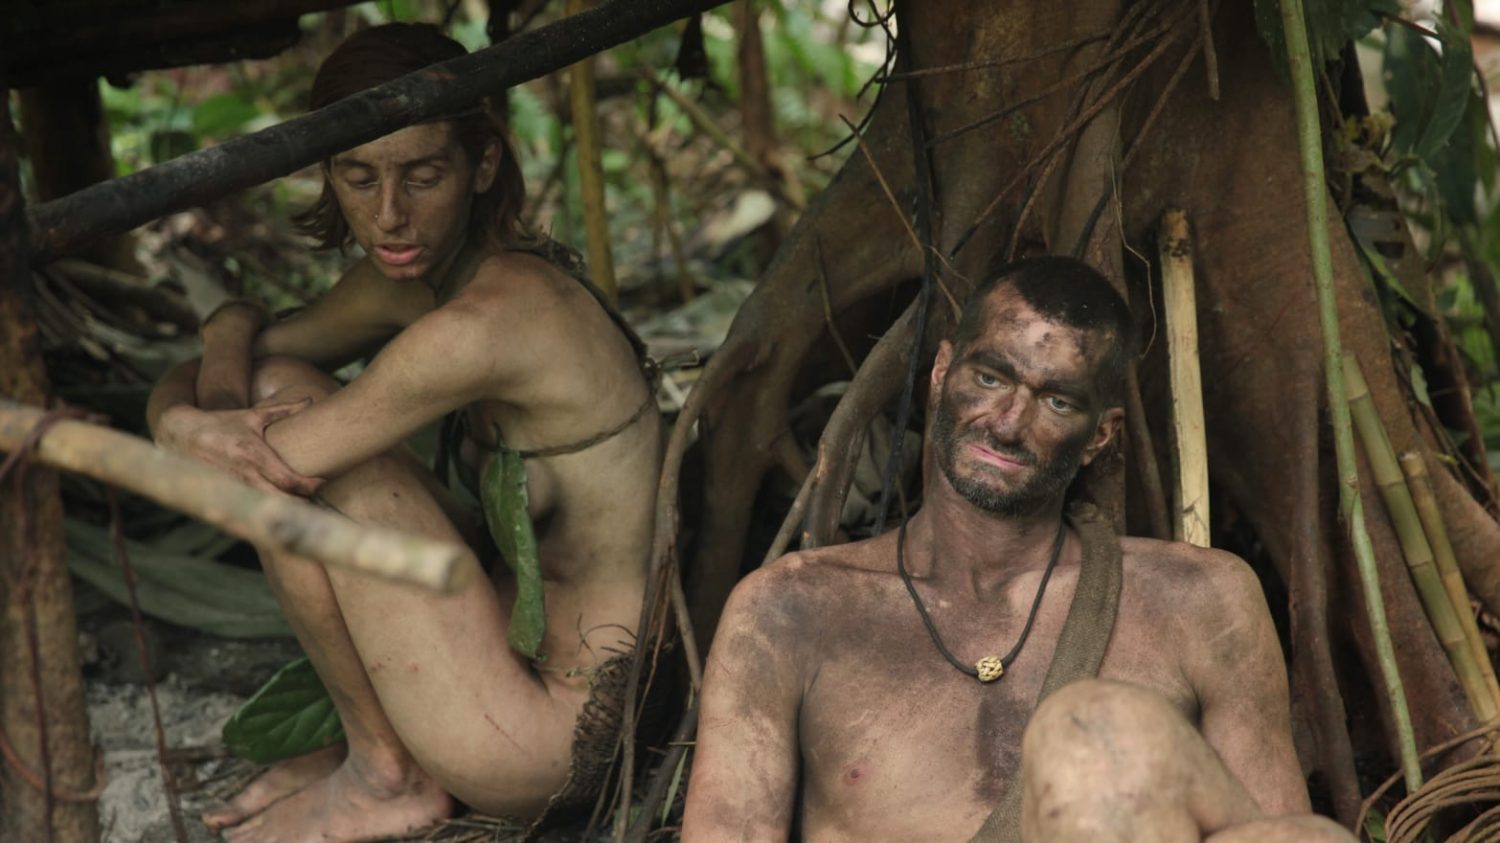 do naked and afraid contestants have sex during their stay?